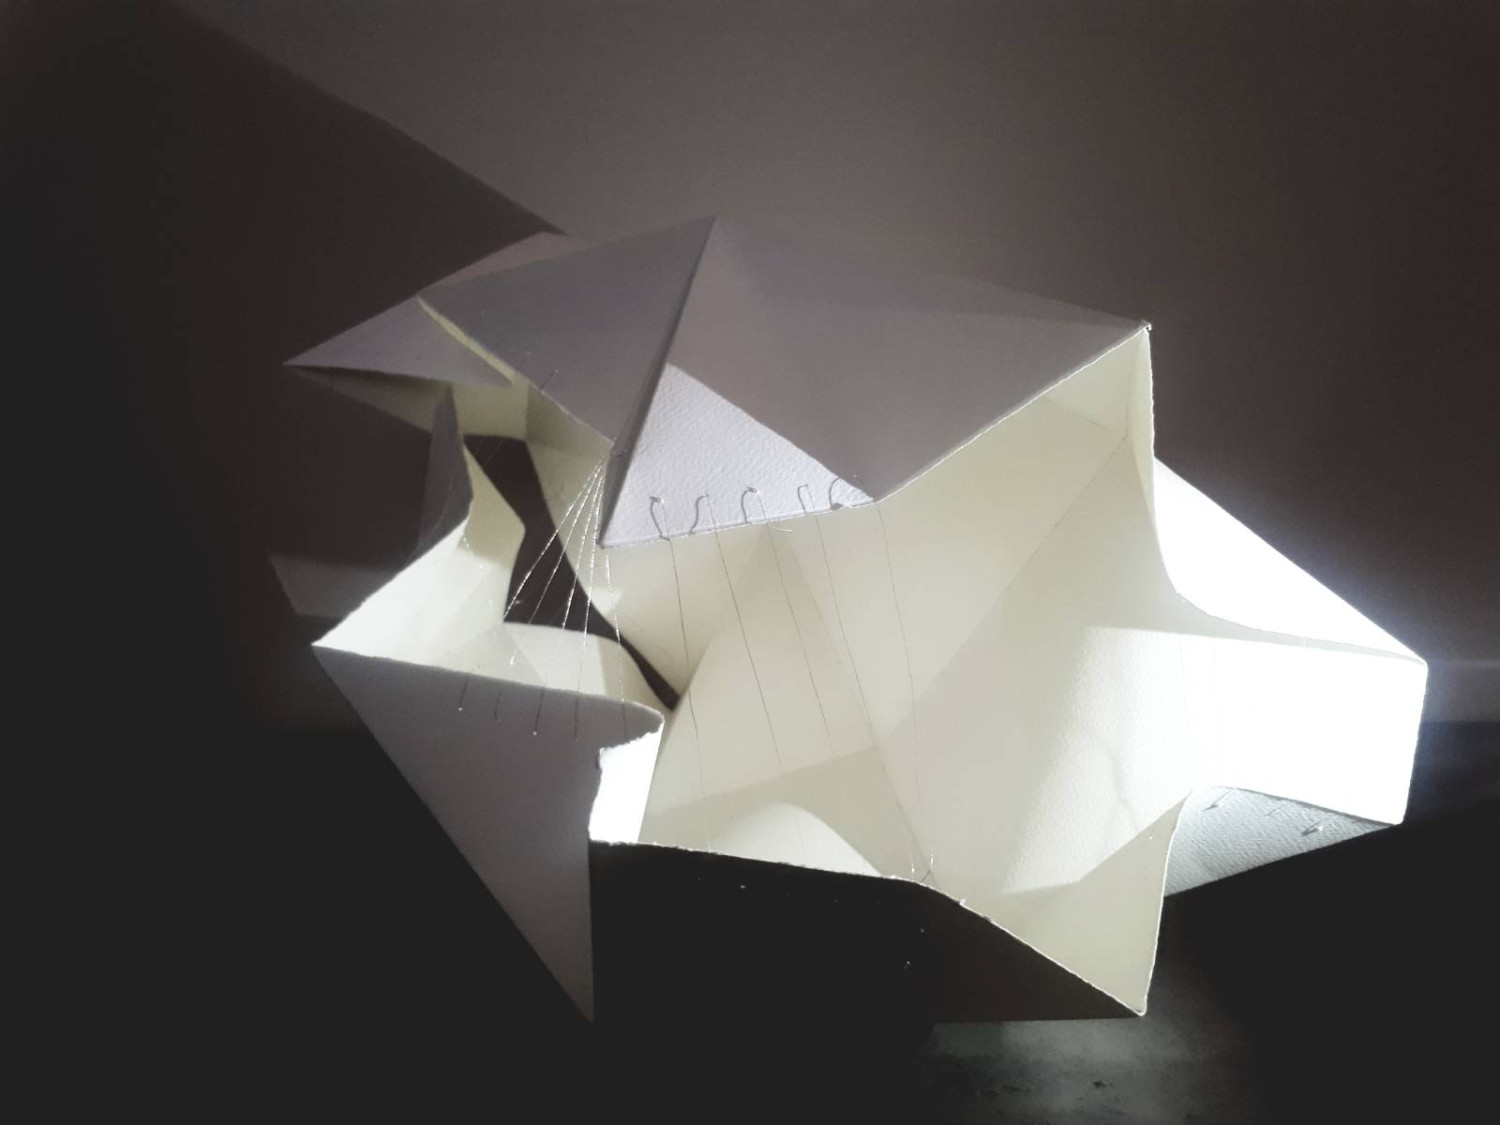 *dwell*, fabriano paper sculpture, silver threads